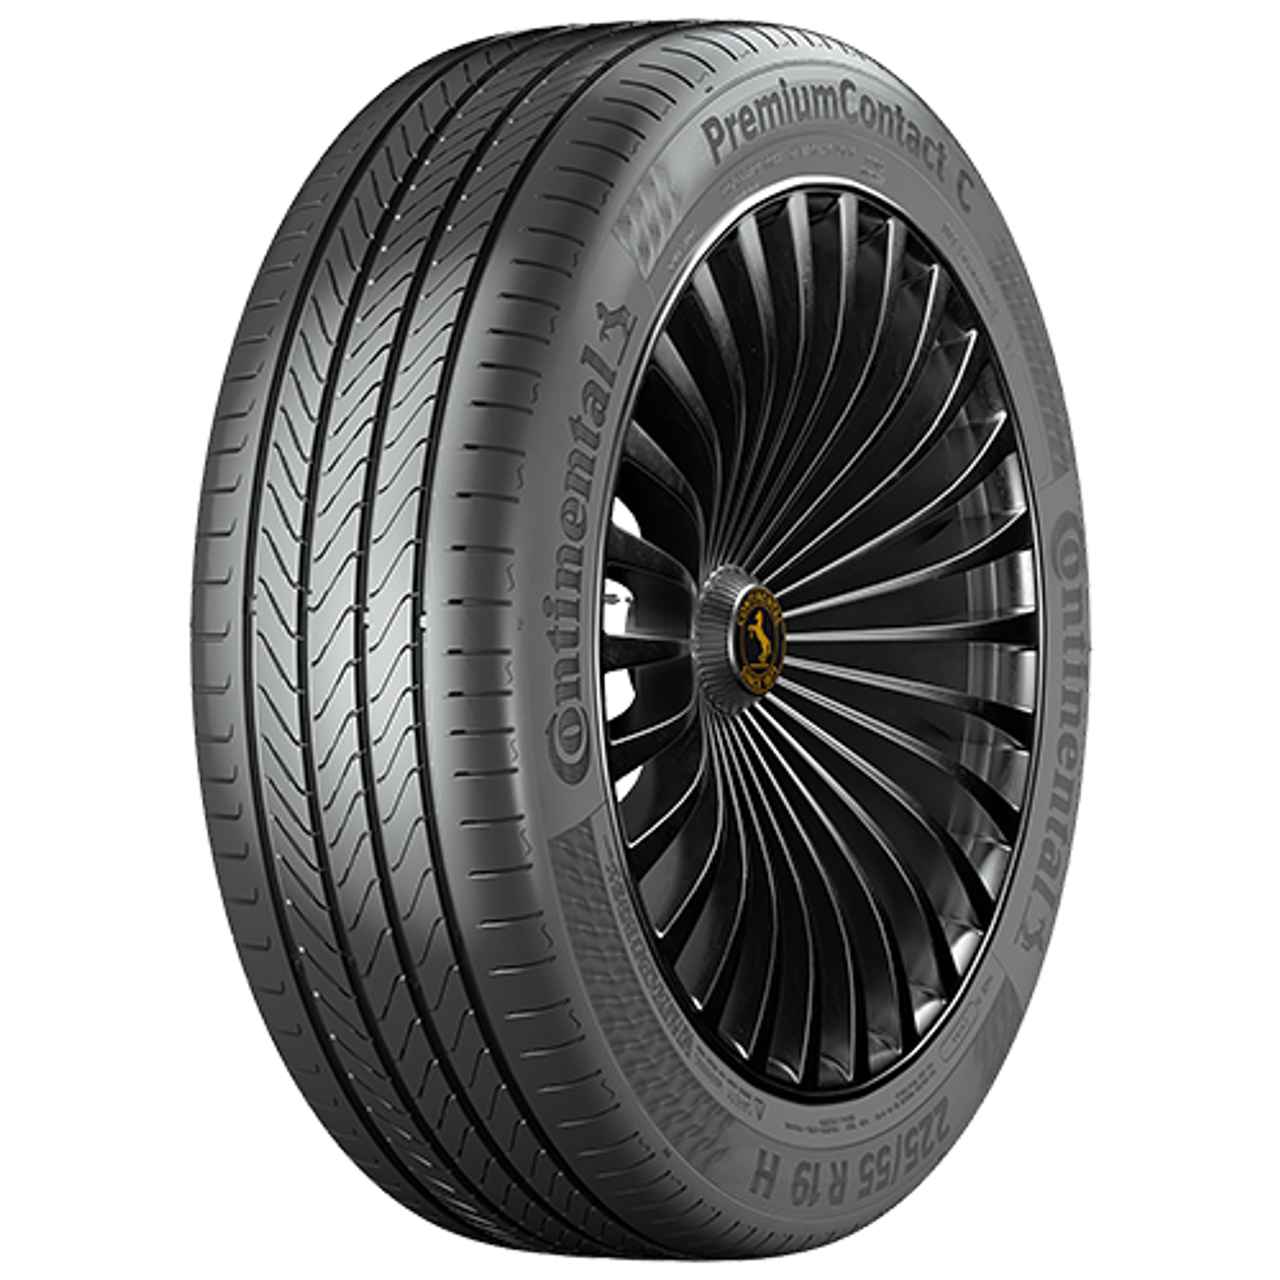 CONTINENTAL PREMIUMCONTACT C (EVc) 255/45R20 105V CONTISILENT FR BSW